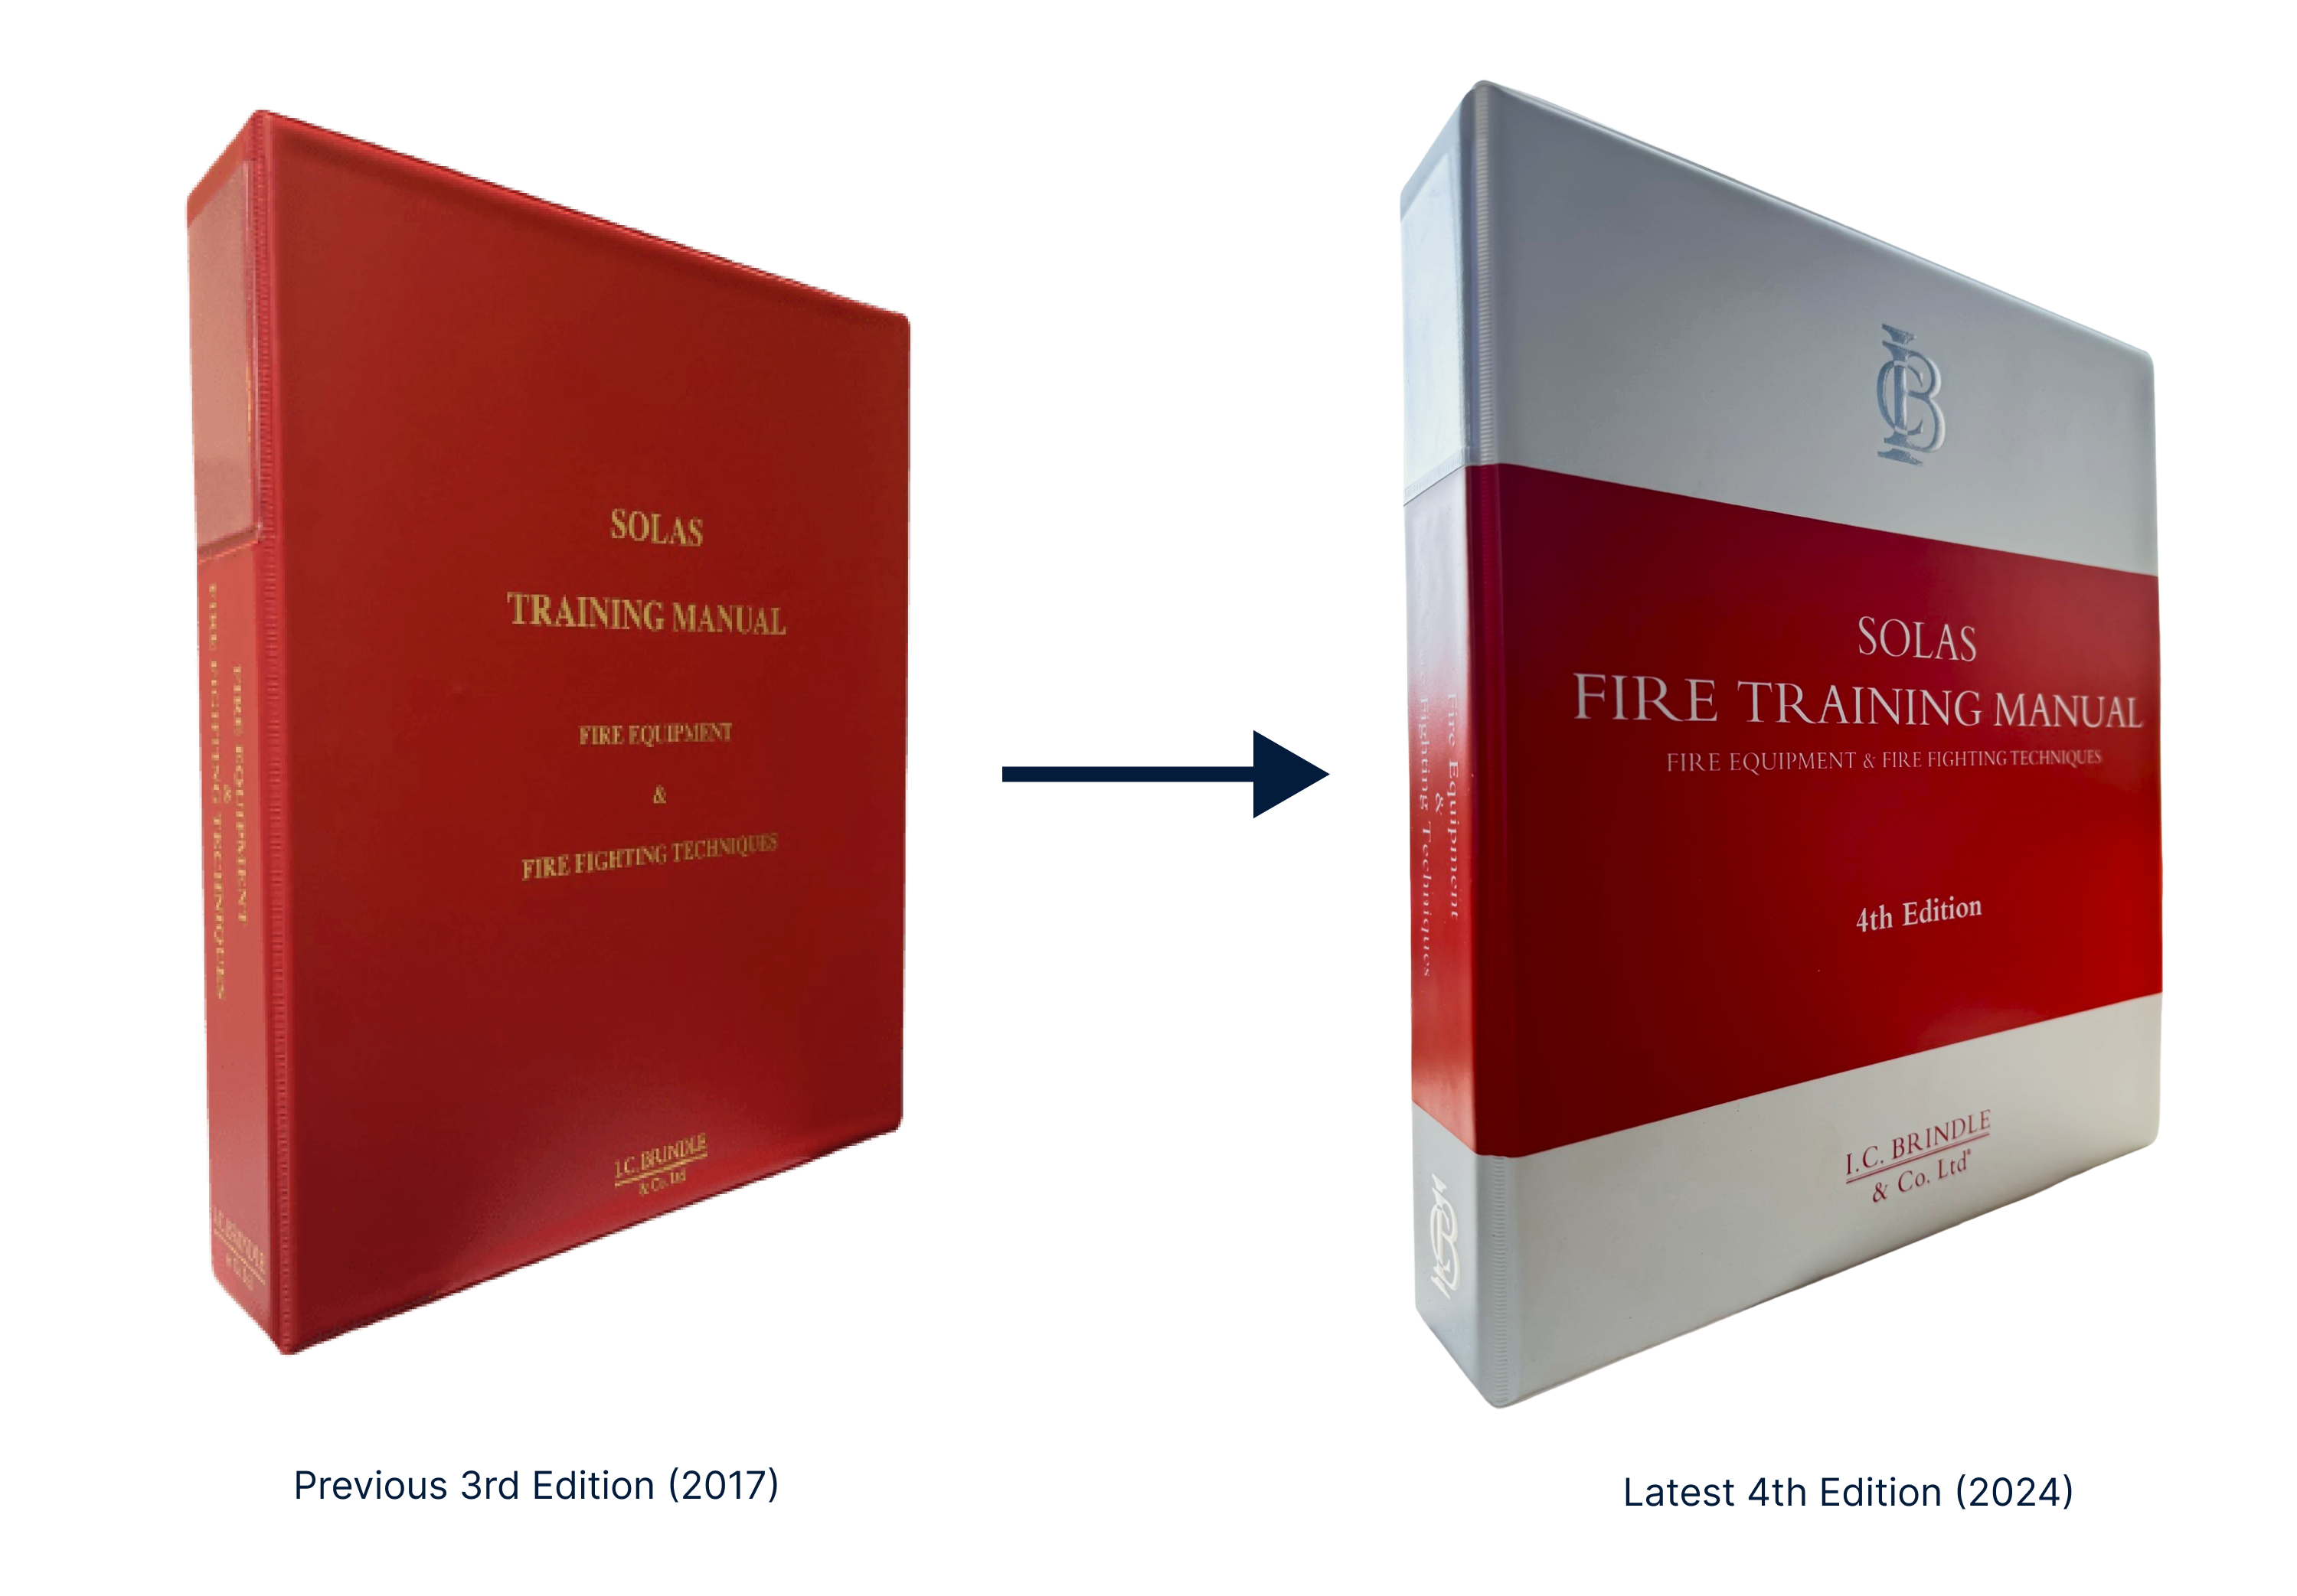 A side-by-side view of the previous 3rd edition Fire Training Manual and the new 2024 4th Edition SOLAS Fire Training Manual